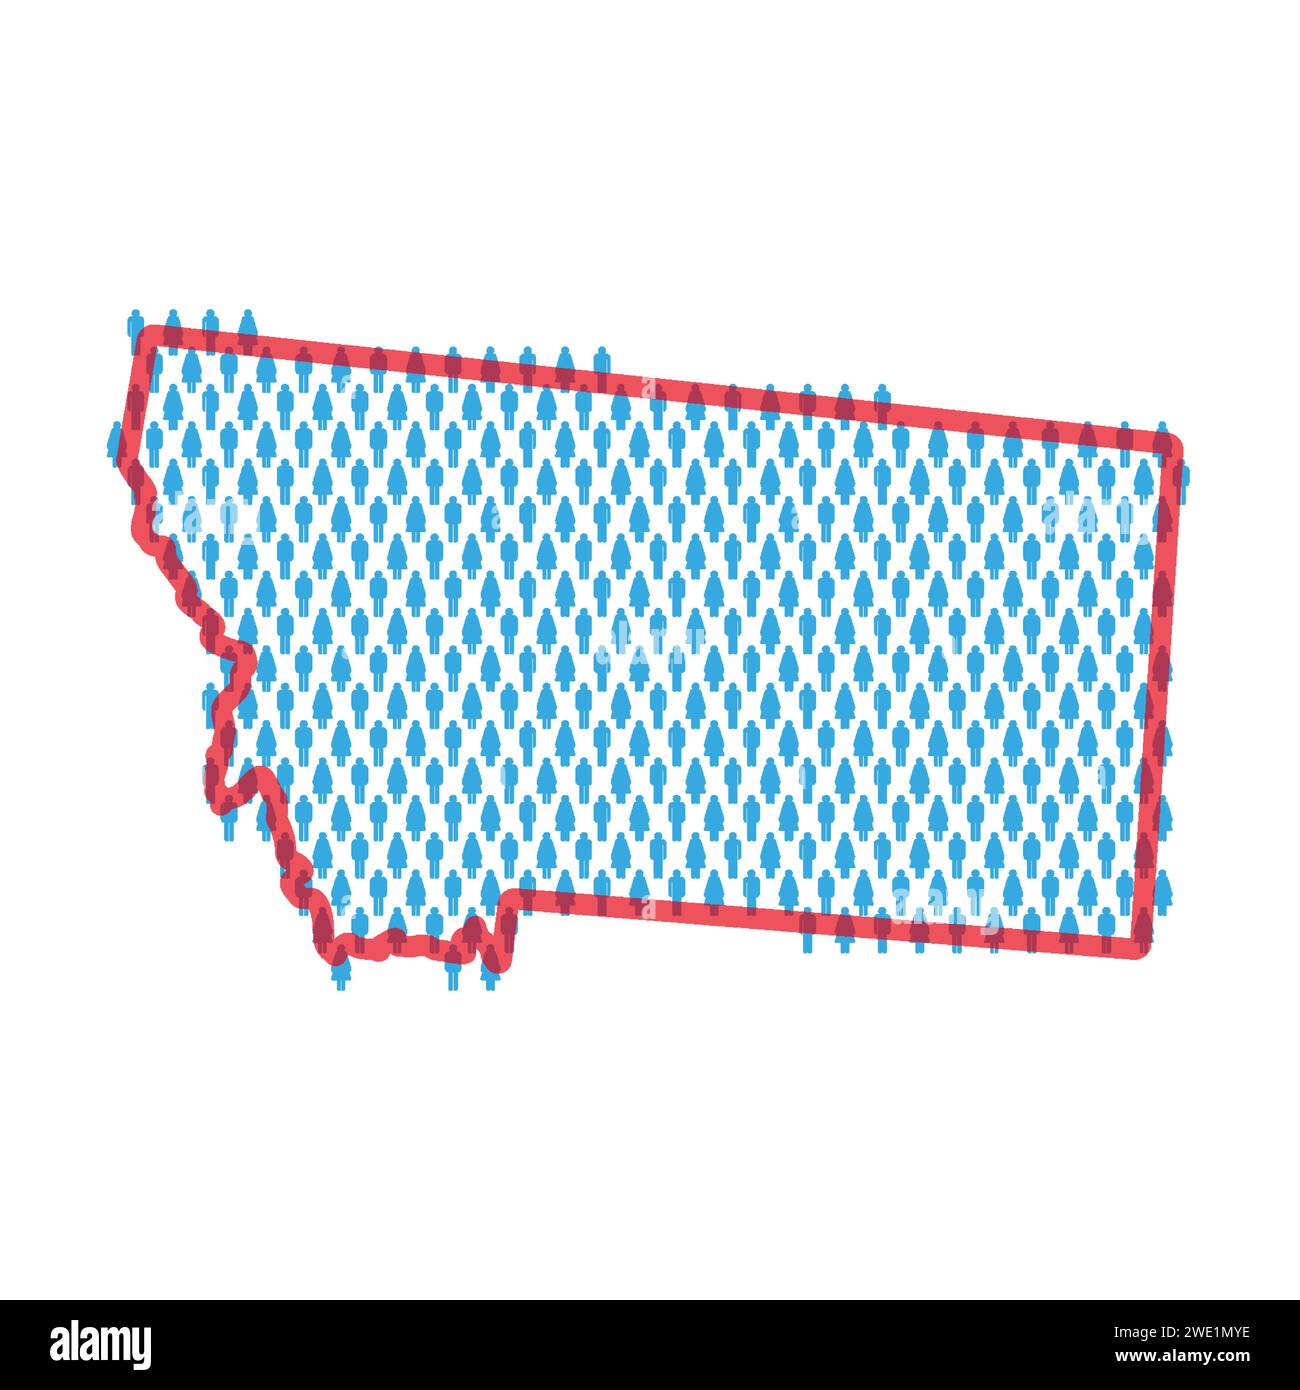 Montana population map. Stick figures people map with bold red translucent state border. Pattern of men and women icons. Isolated vector illustration. Stock Vector